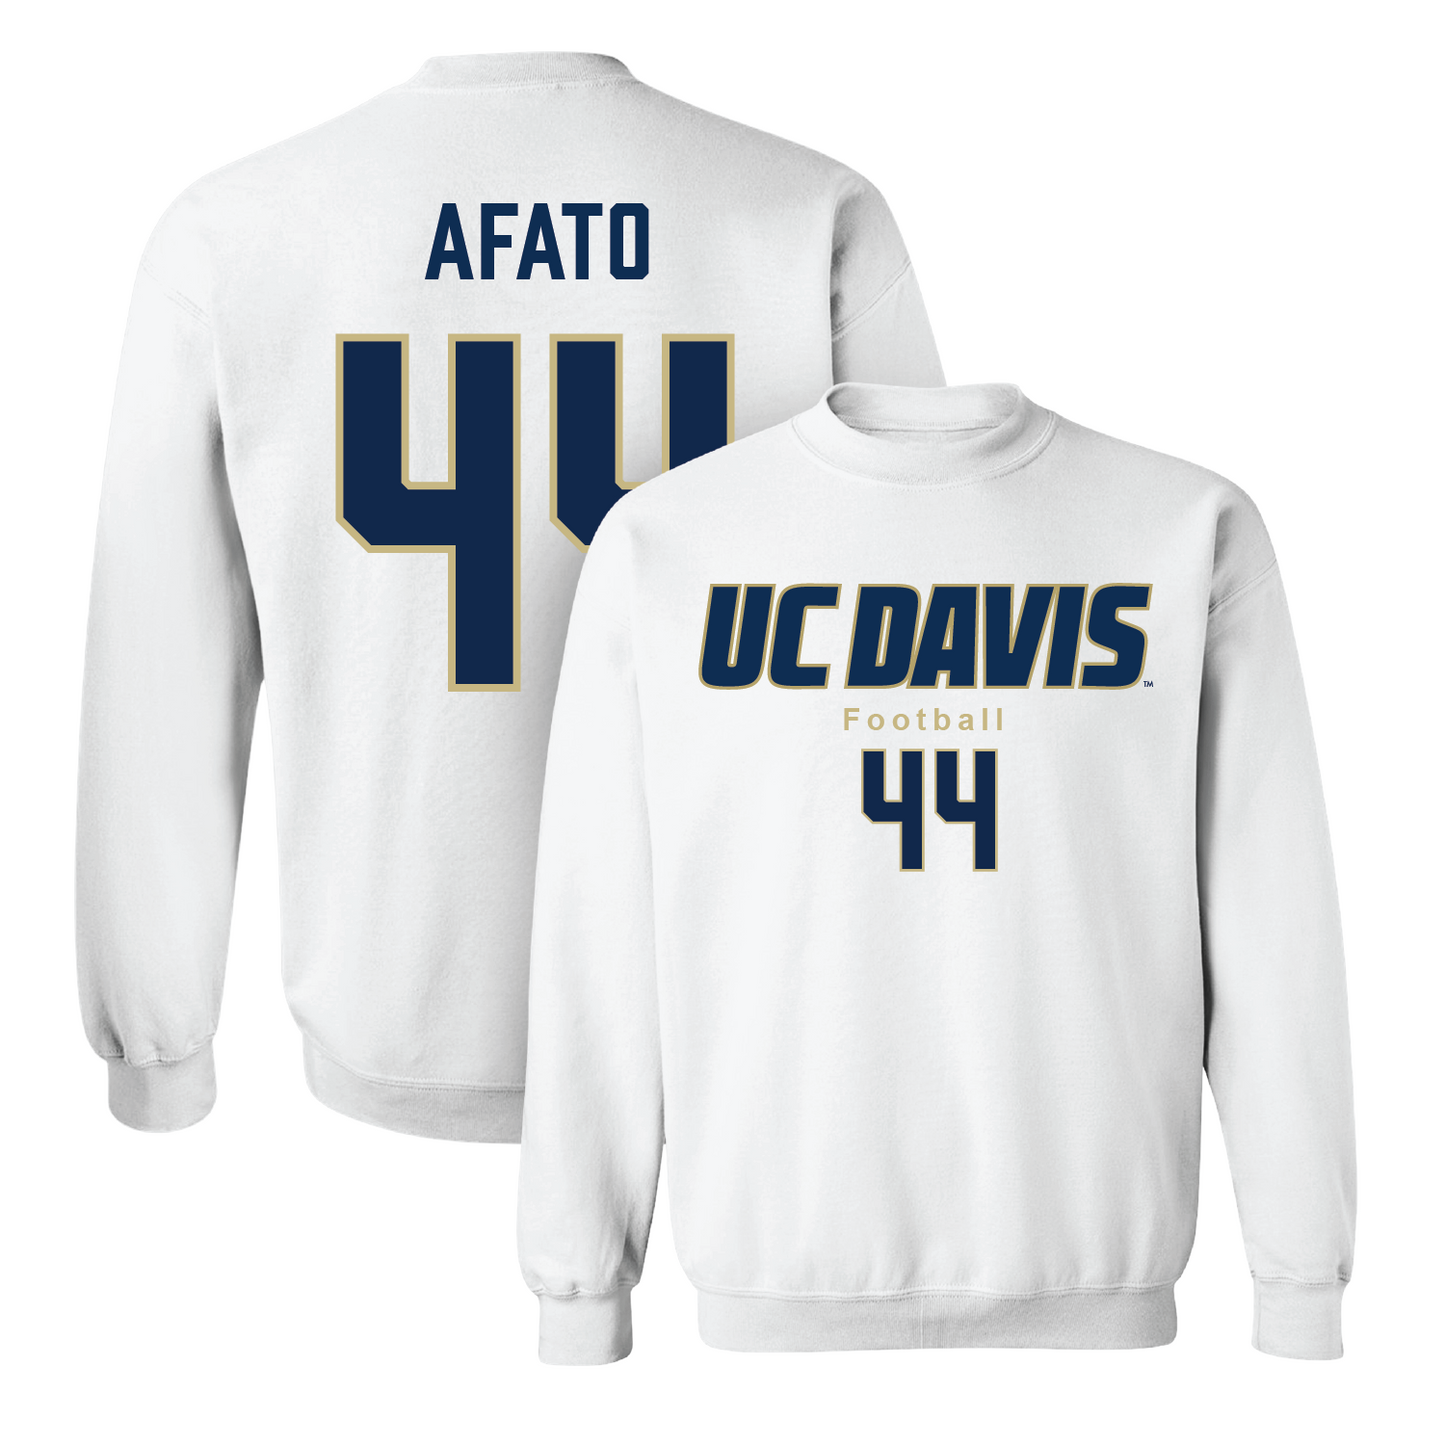 White Football Classic Crew 4 Youth Small / Nick Afato | #44